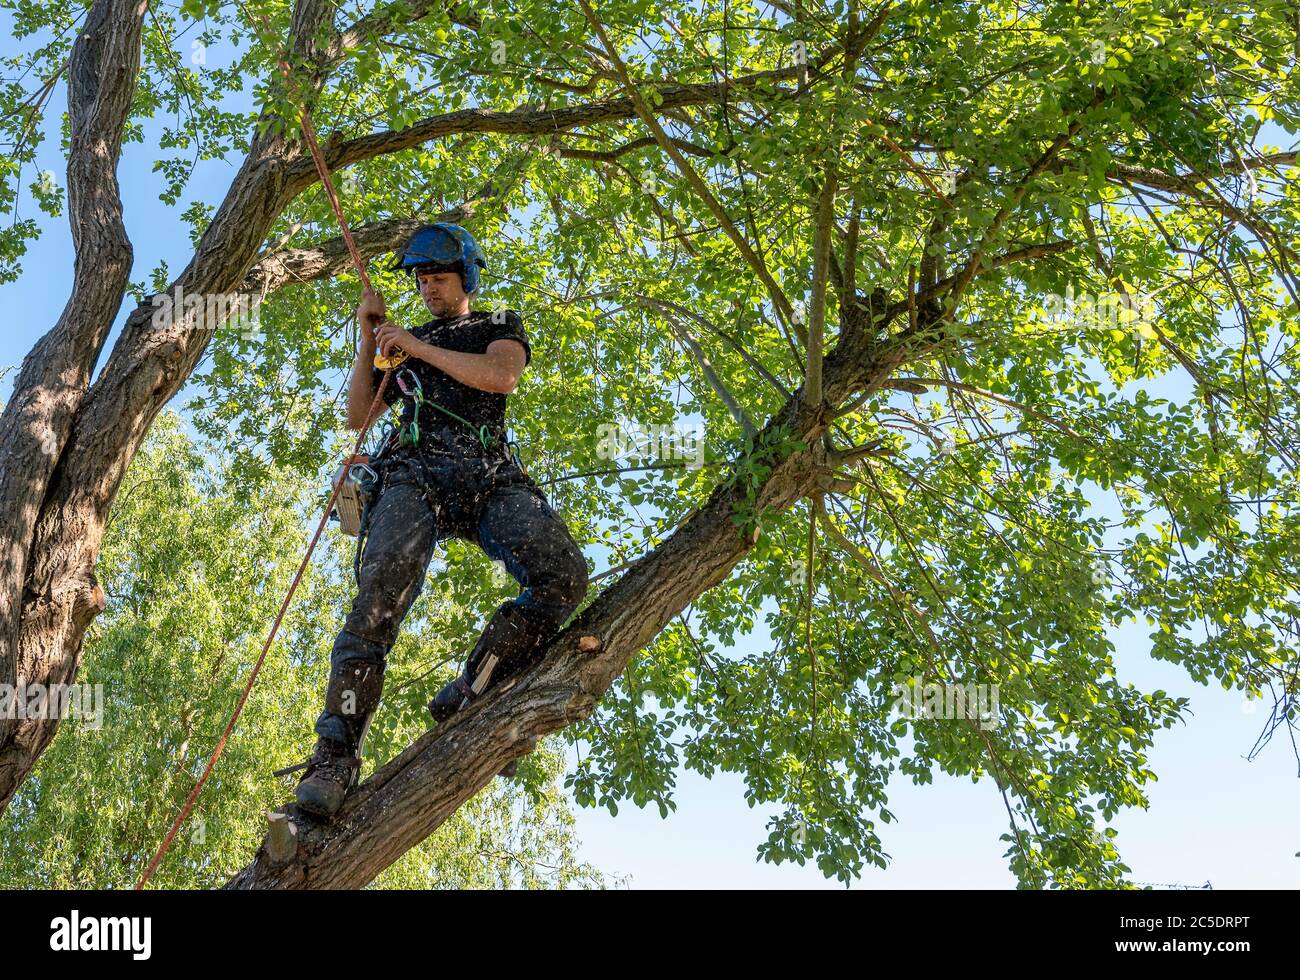 A Tree Surgeon or Arborist working up a tree checking his safety ropes. Sawdust is falling from the tree. Stock Photo